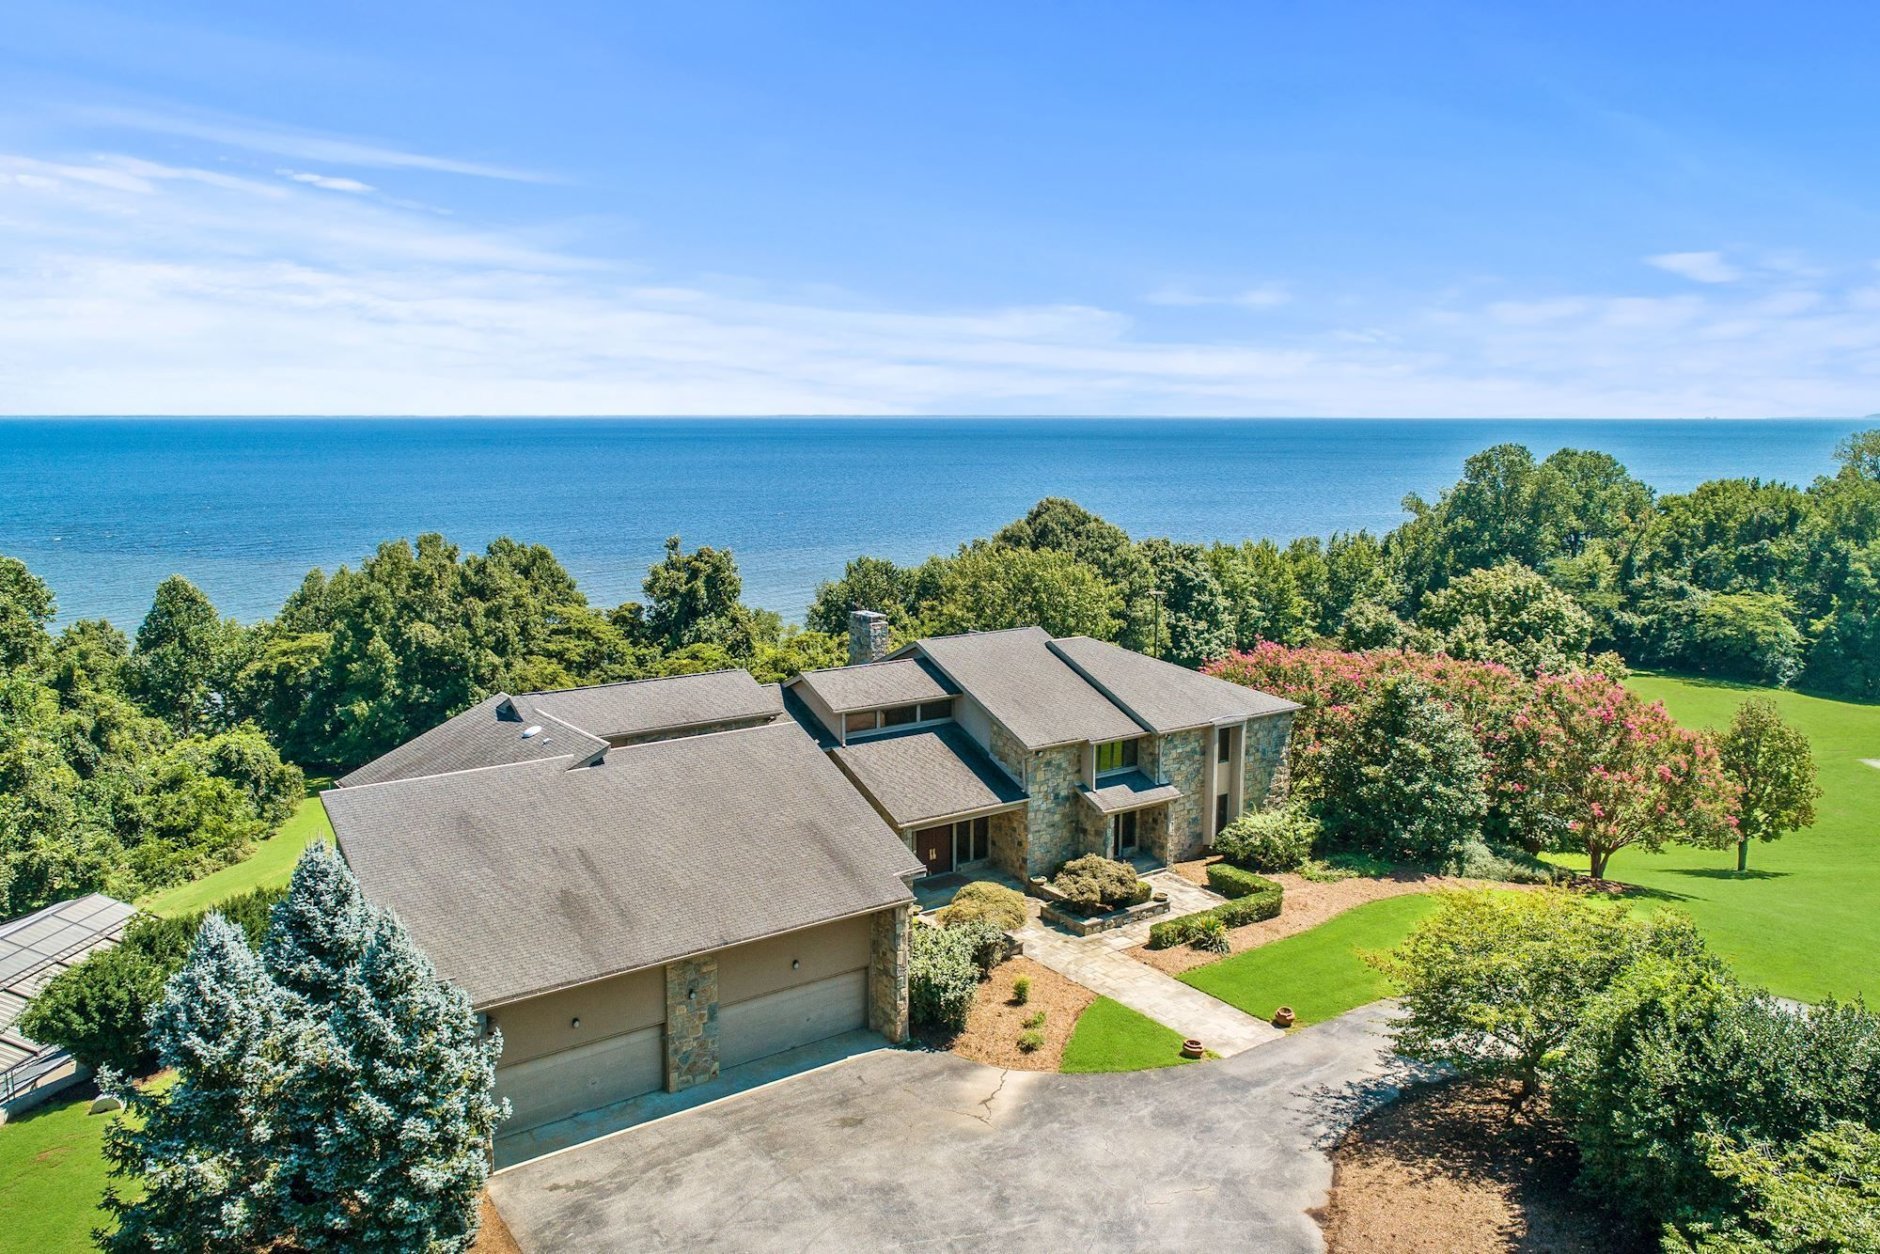 The as-is asking price for Tom Clancy's Peregrine Cliff is $6.2 million. (Courtesy Cummings & Co. Realtors)